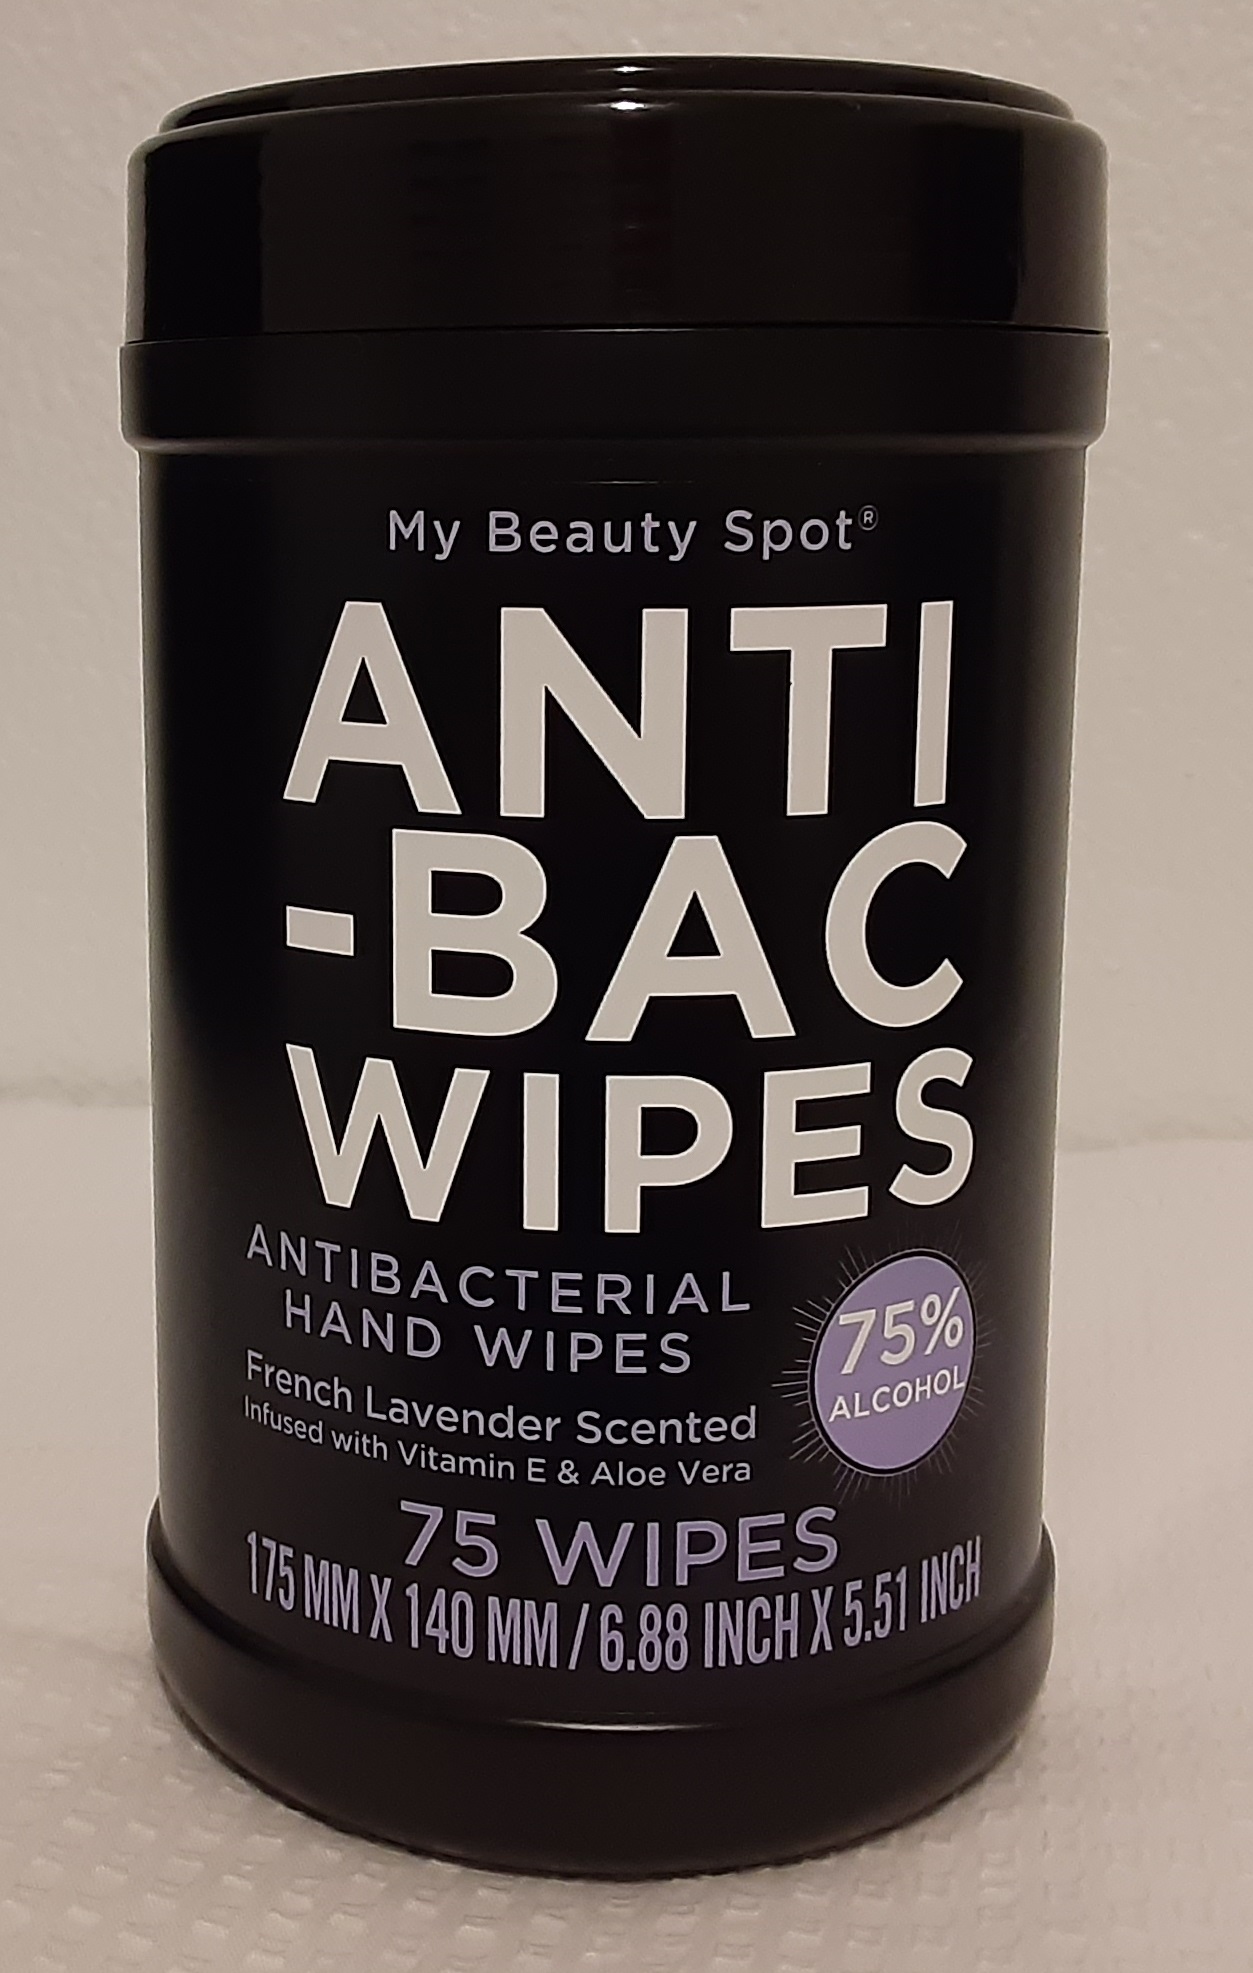 Anti Bacterial Hand Wipes, French Lavender scented